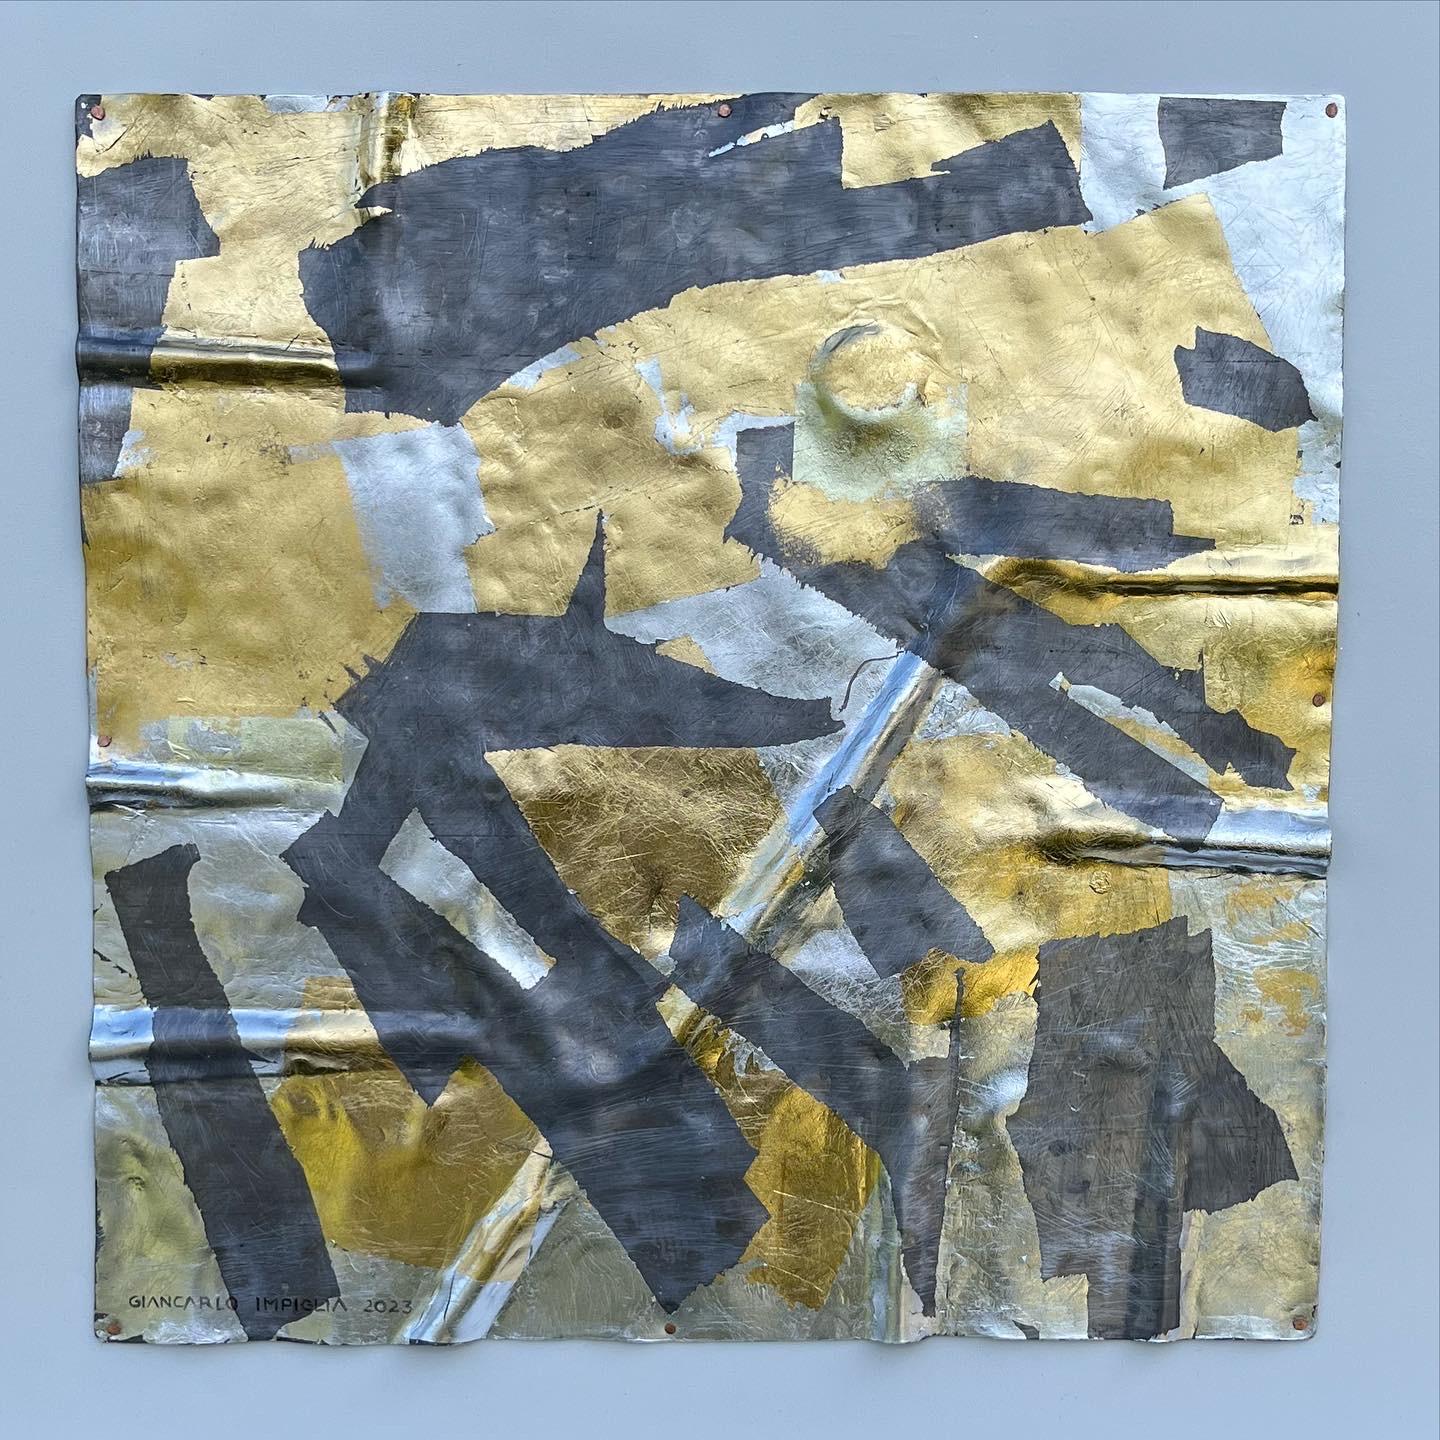 Giancarlo Impiglia Abstract Painting - Abstract, contemporary, gold leaf, silver work "Precious Metals II" arte povera